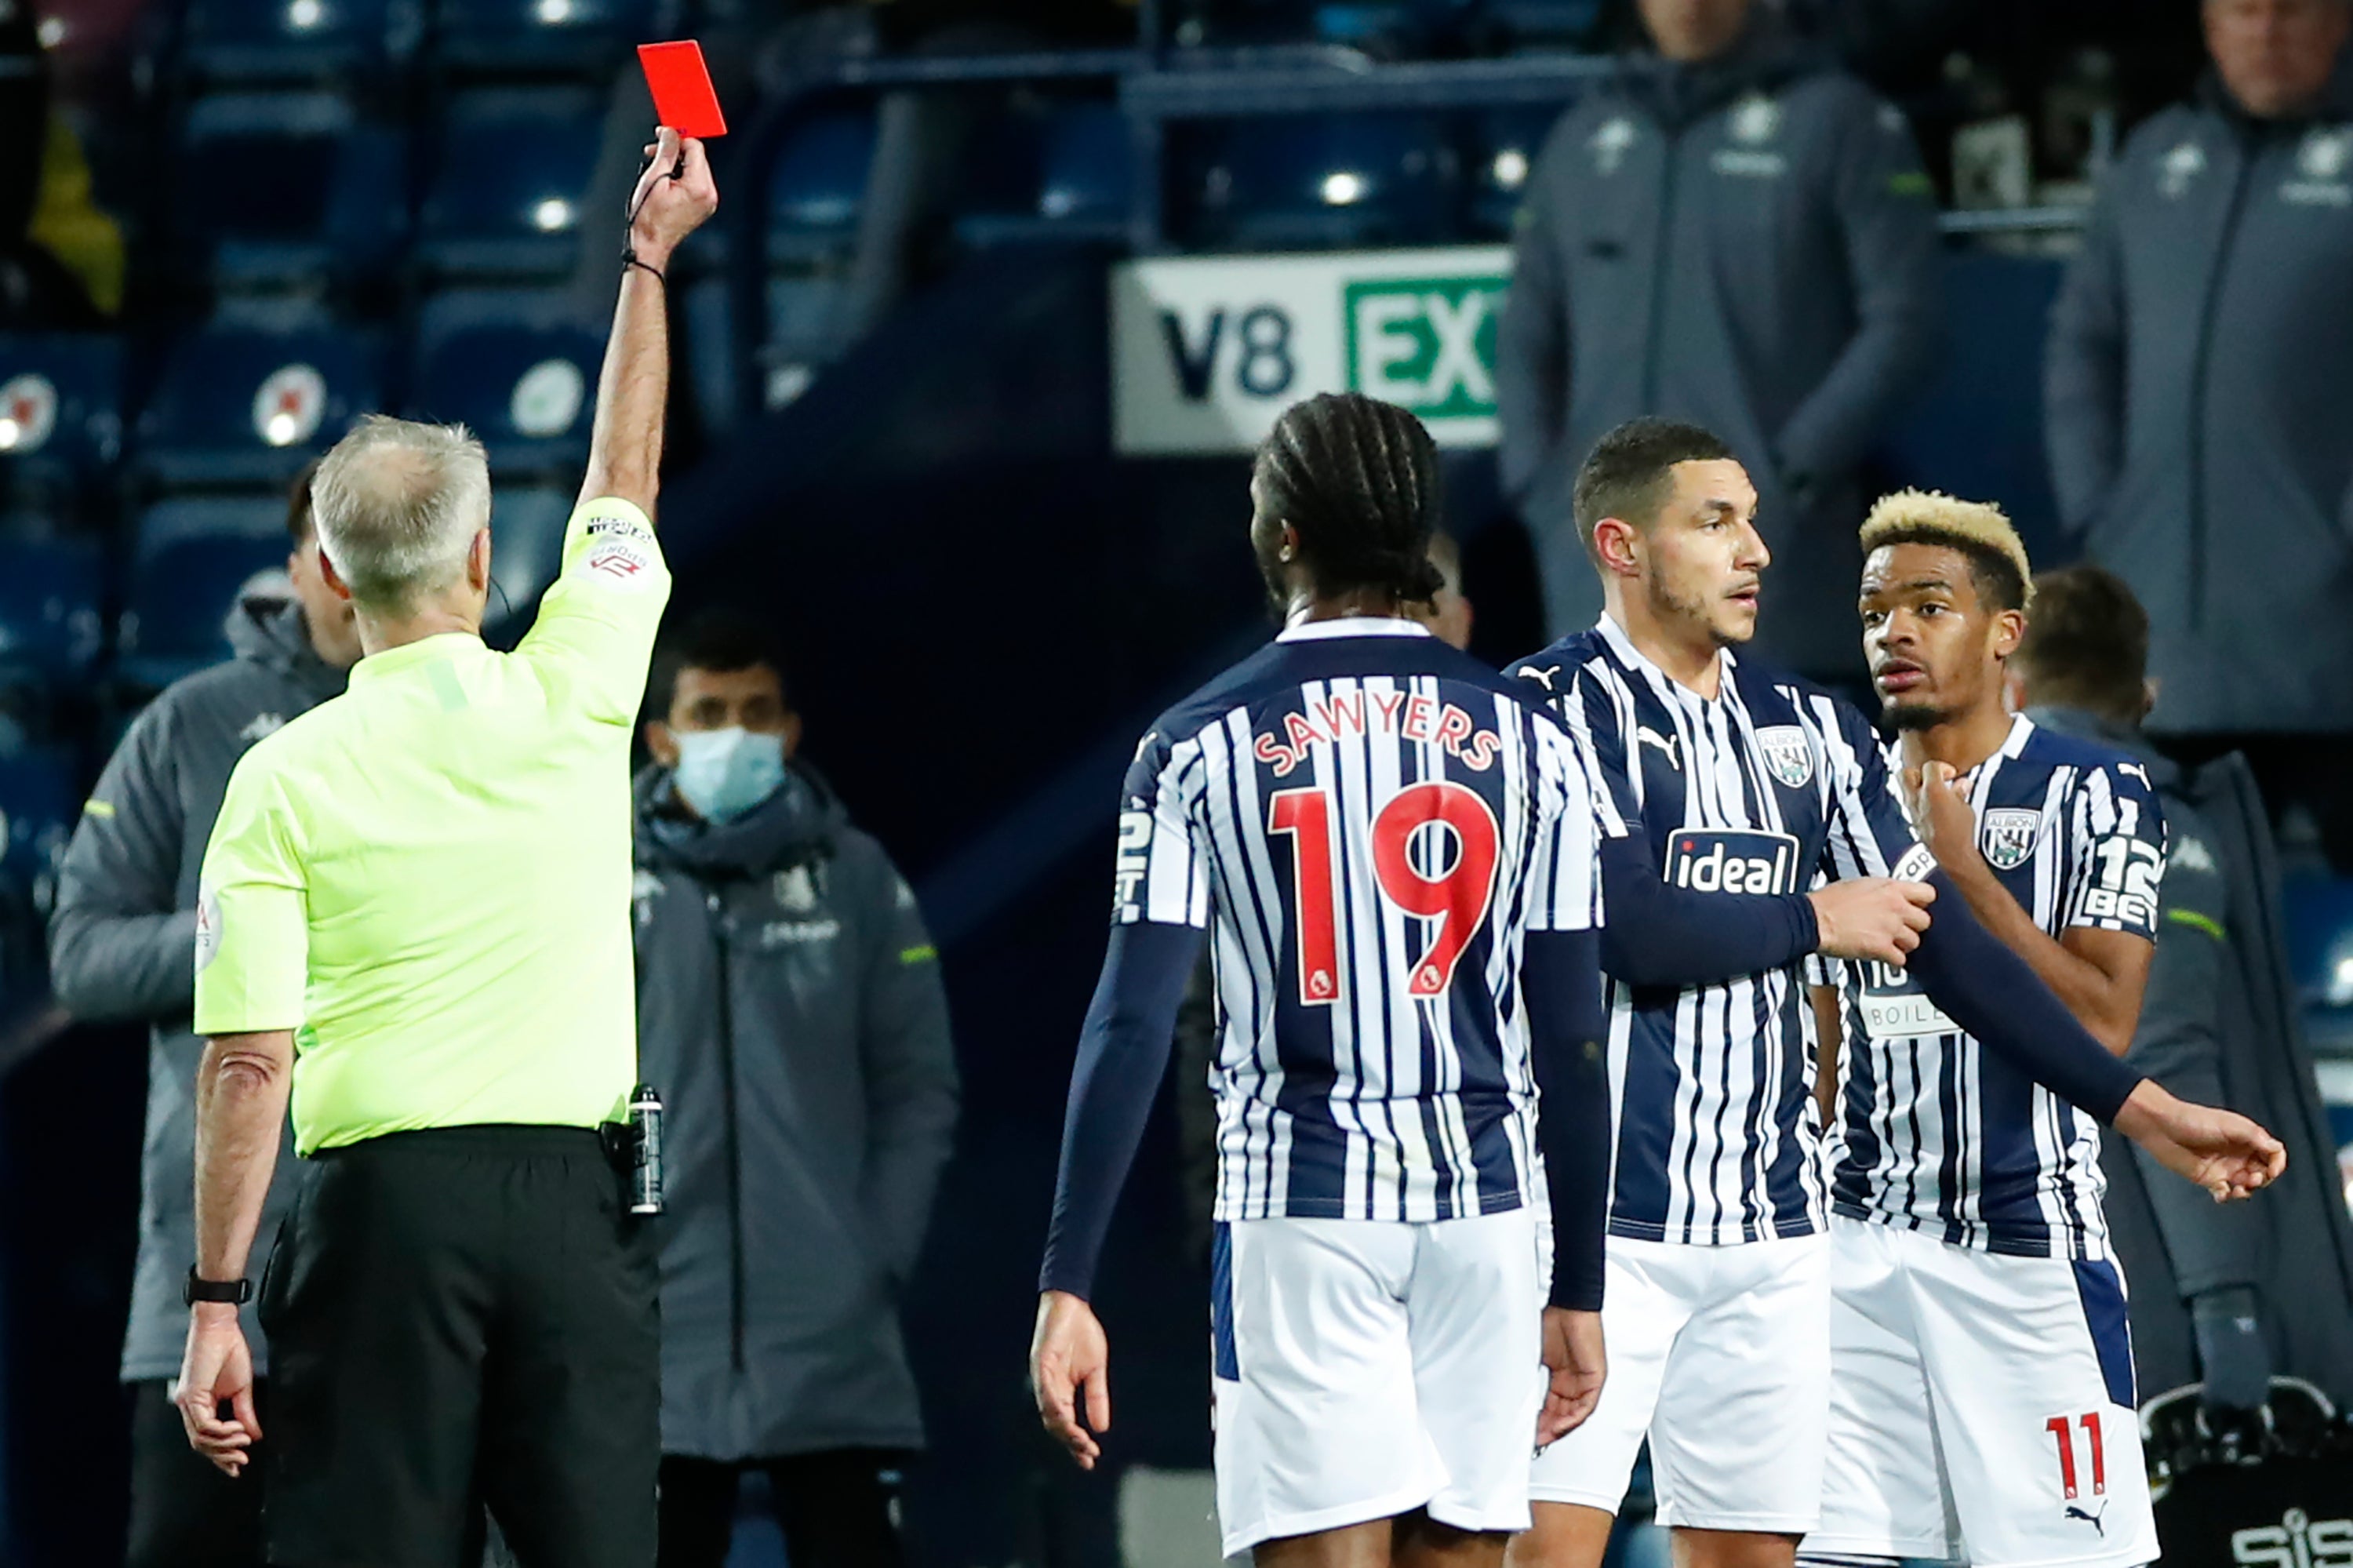 Jake Livermore was sent off in Sam Allardyce’s first game as West Brom manager